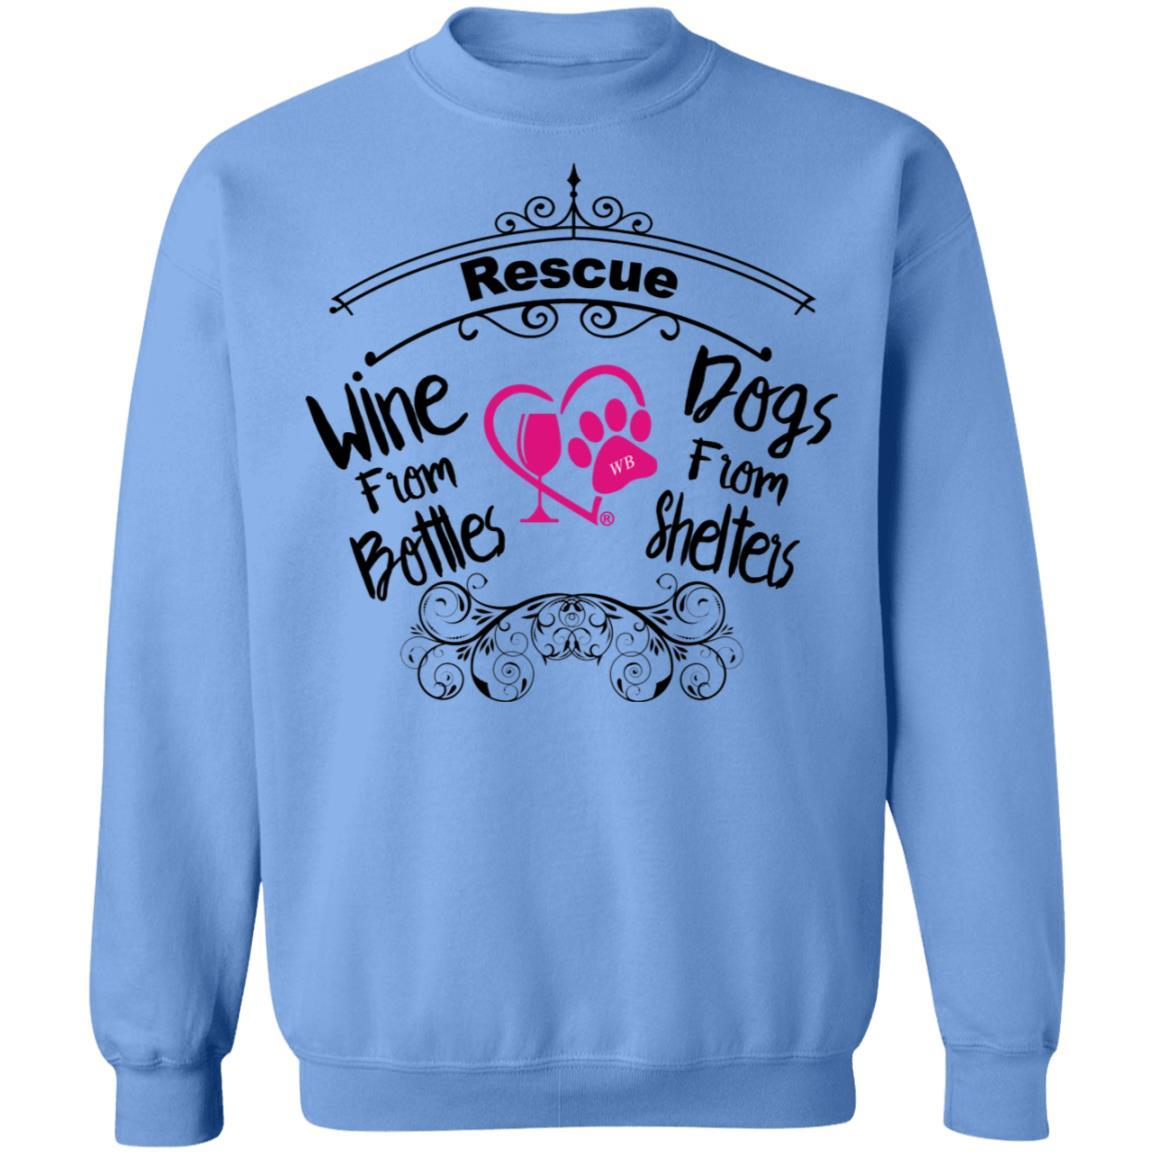 Sweatshirts Carolina Blue / S Winey Bitches Co "Rescue Wine from Bottles, Dogs from Shelters" Crewneck Pullover Sweatshirt  8 oz. WineyBitchesCo